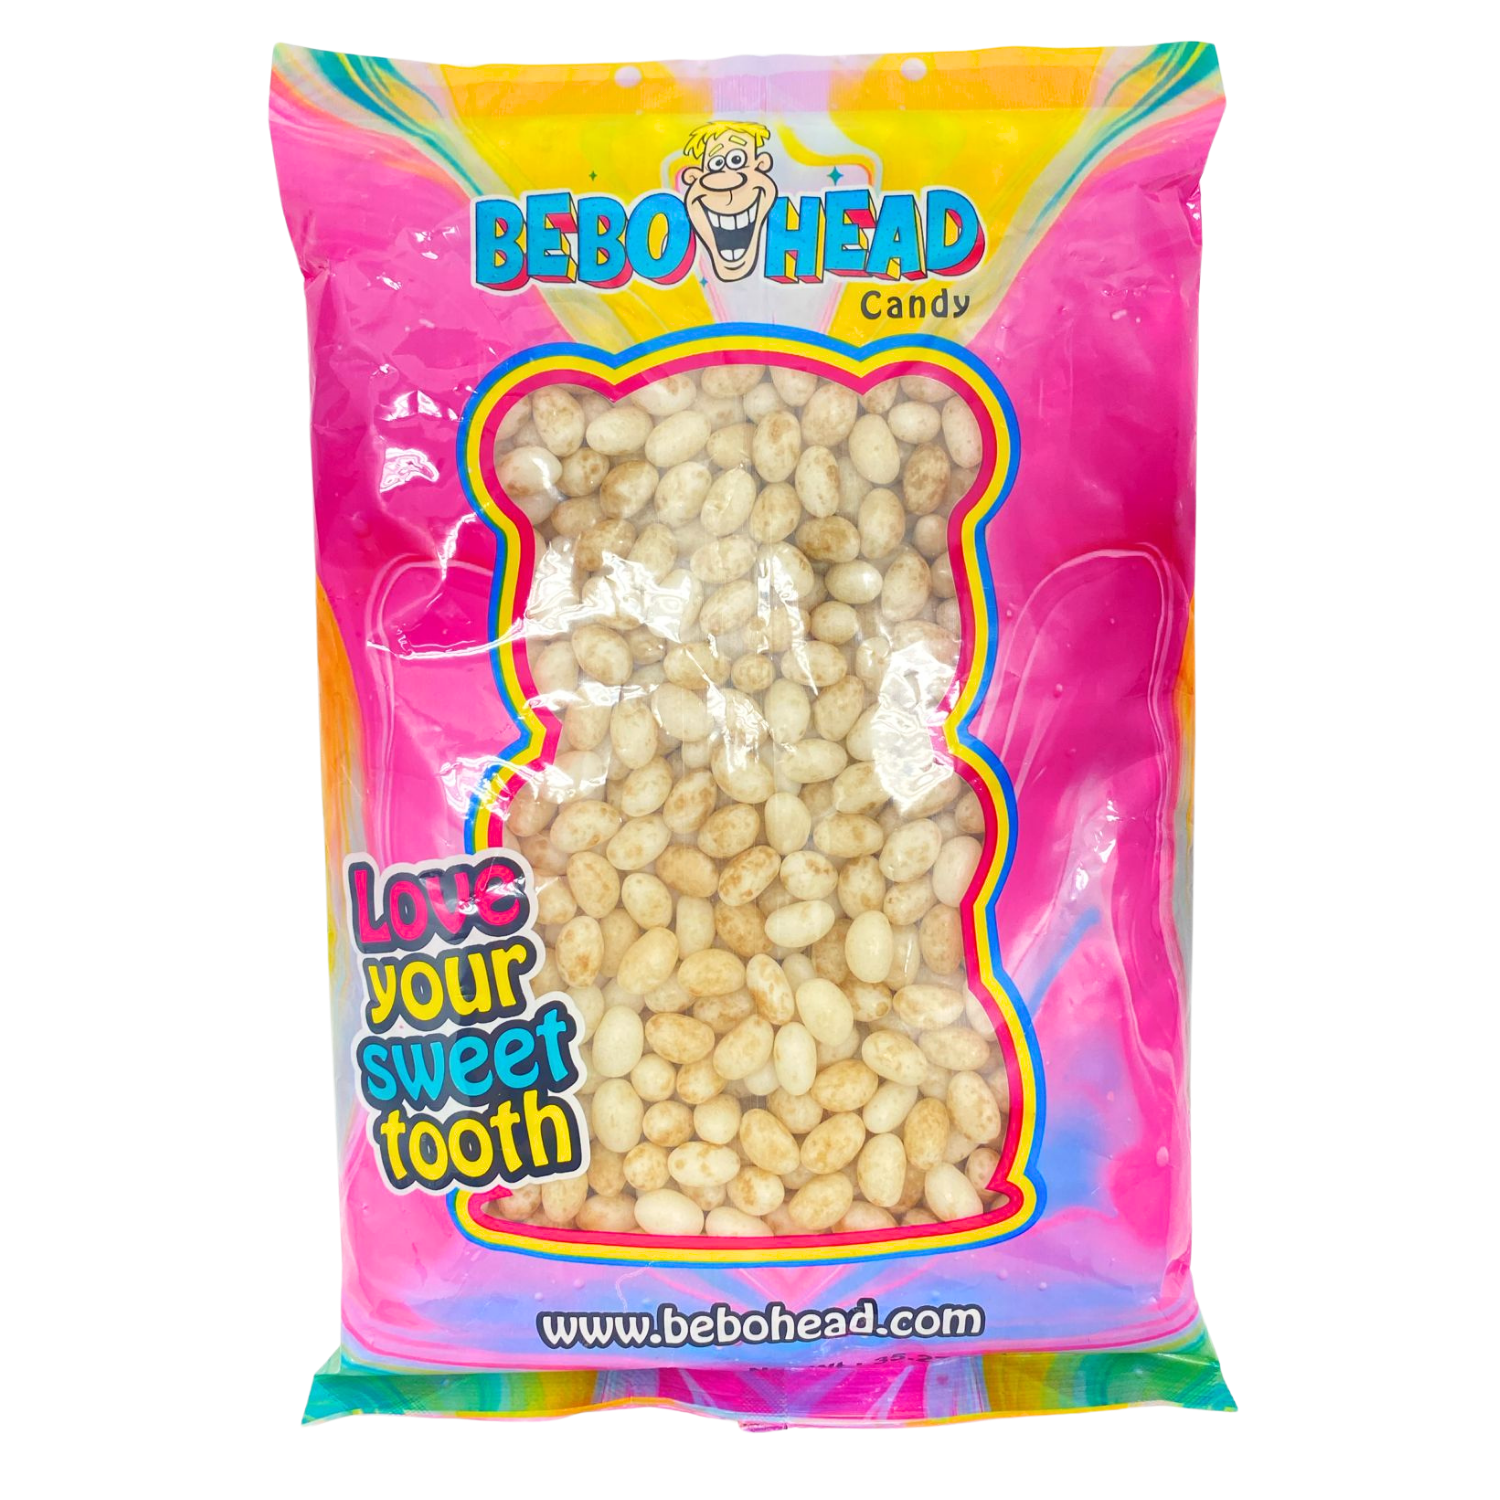 Pineapple Jelly Beans - 2.2 Pounds